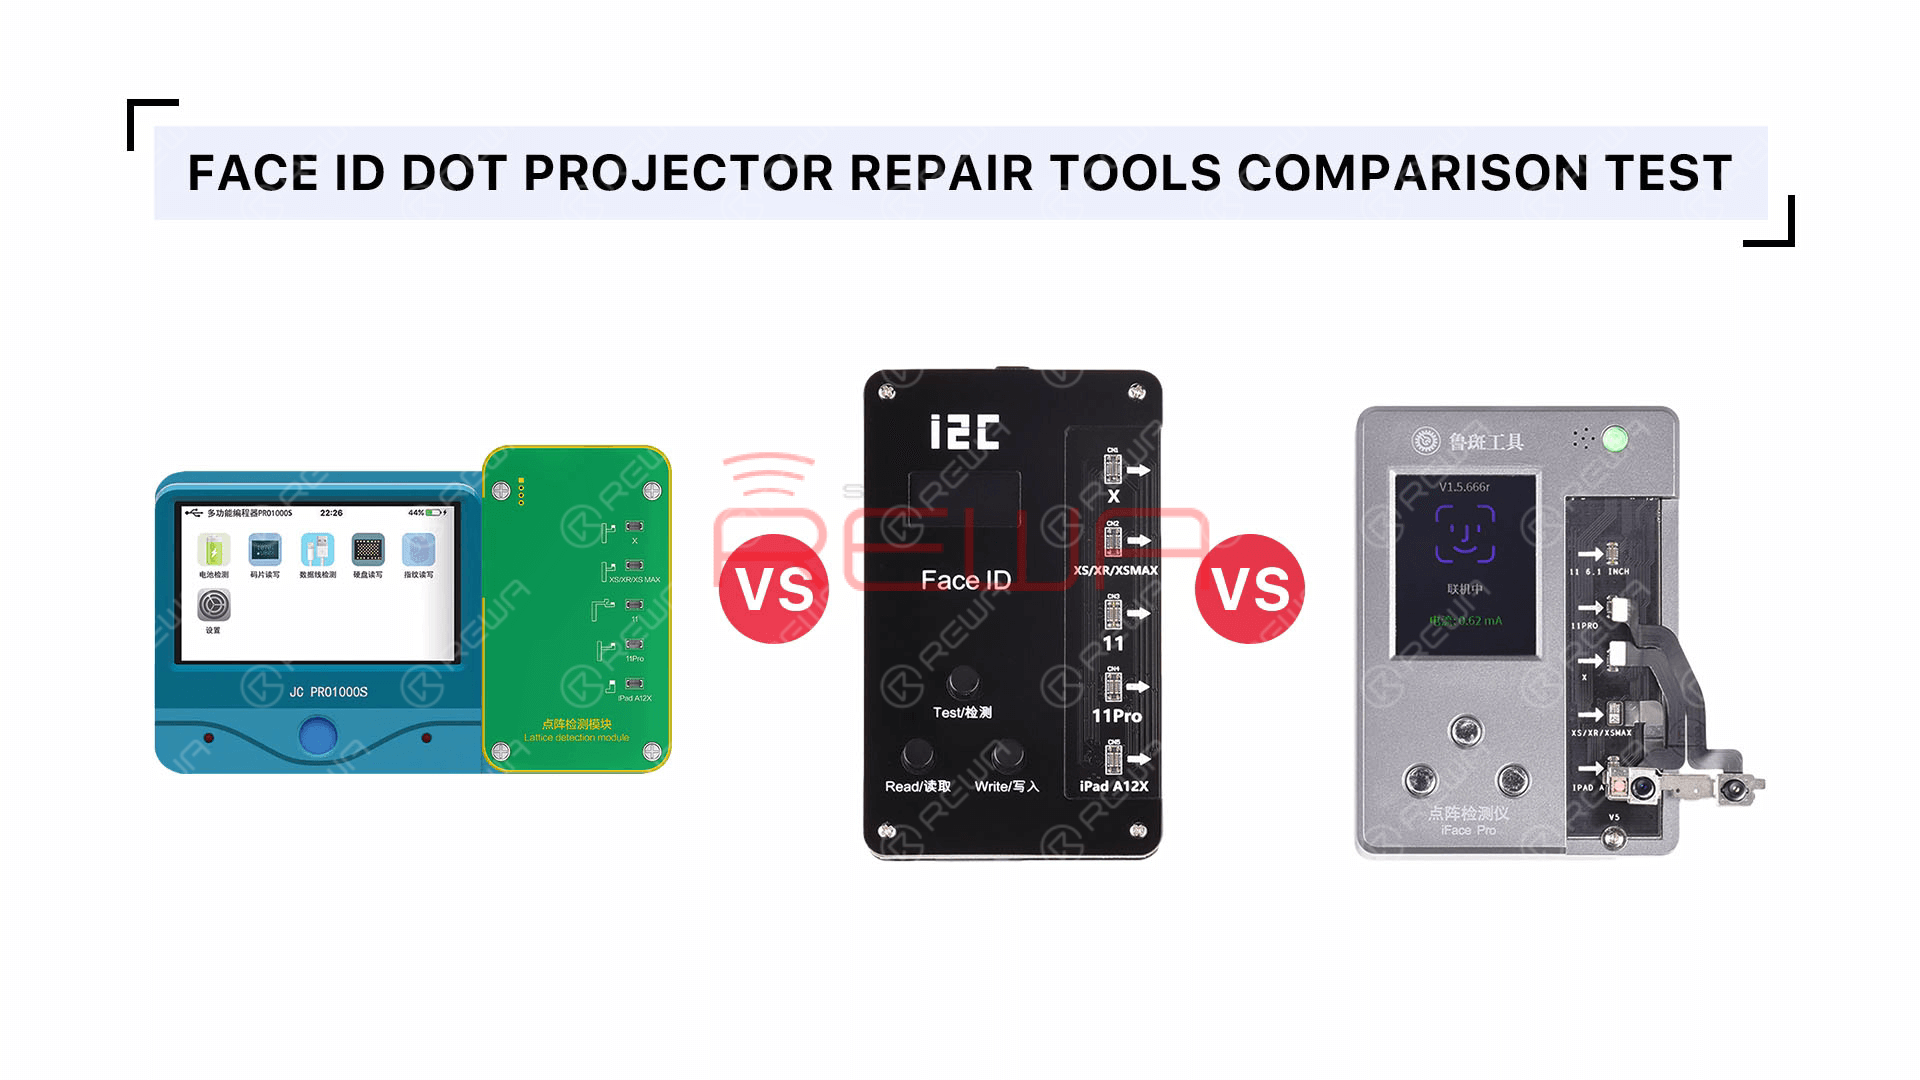 The fault is face ID not working - move iPhone a little lower/higher. Here we will introduce three different repair tools to fix the problem, which include JC, LUBAN, and I2C.